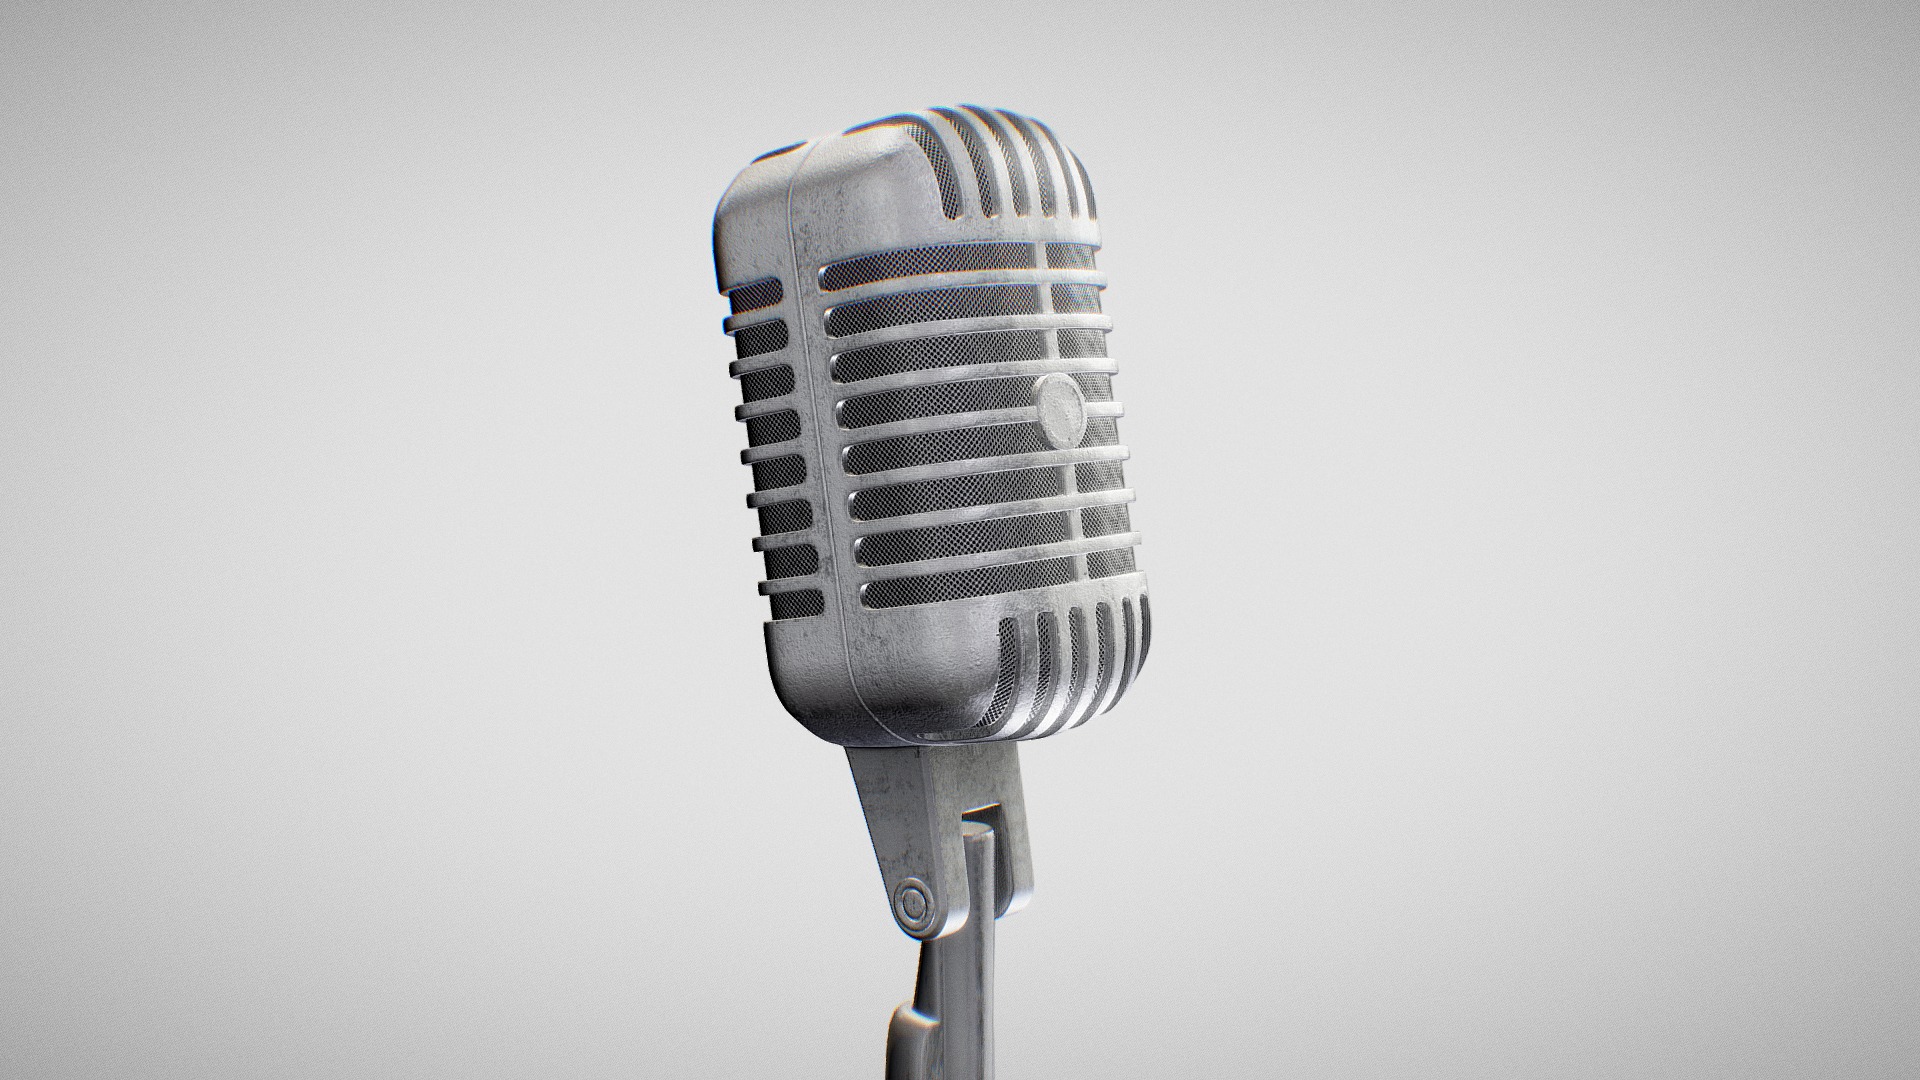 3D model Microphone – Shure 55SH - This is a 3D model of the Microphone - Shure 55SH. The 3D model is about a close-up of a microphone.